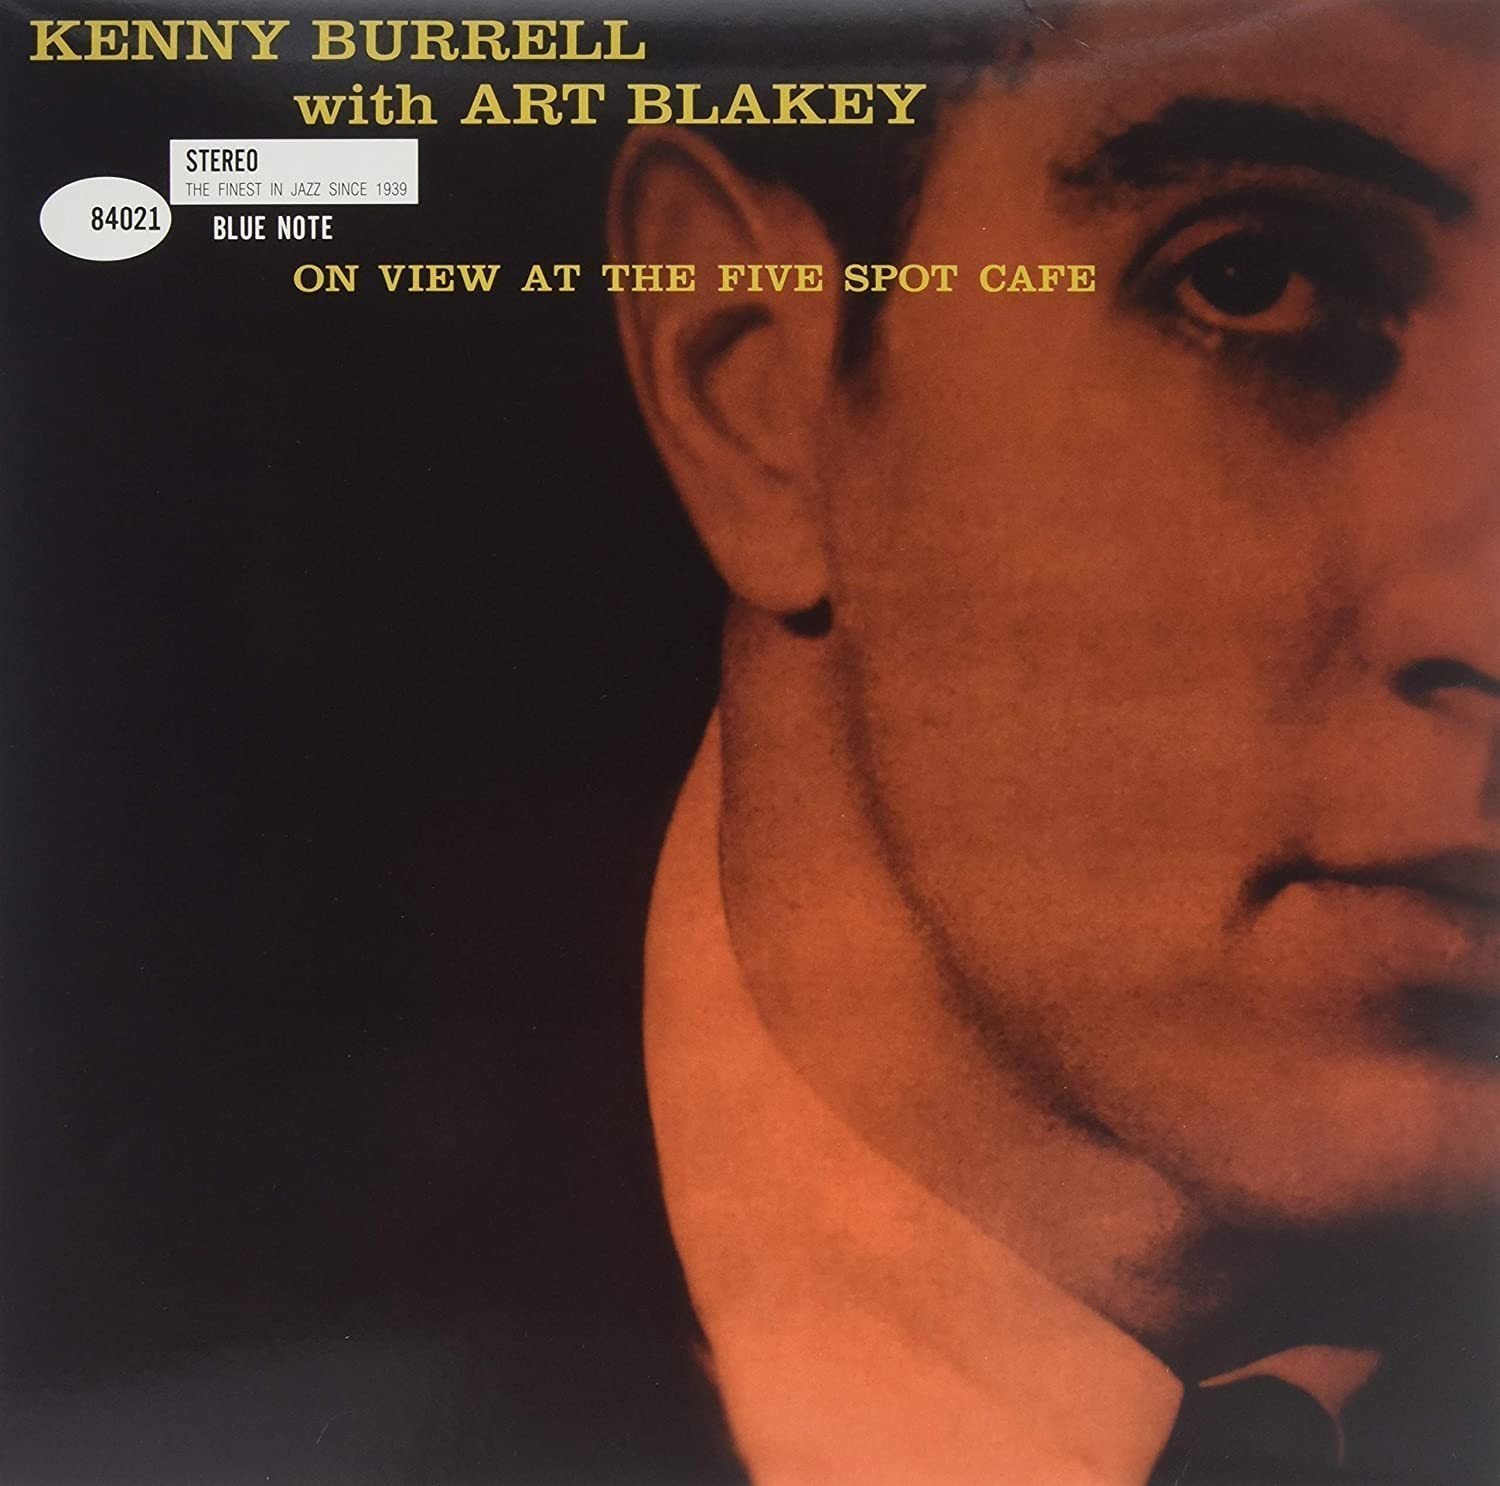 Vinyl Record Kenny Burrell - On View at the Five Spot Cafe (2 LP)